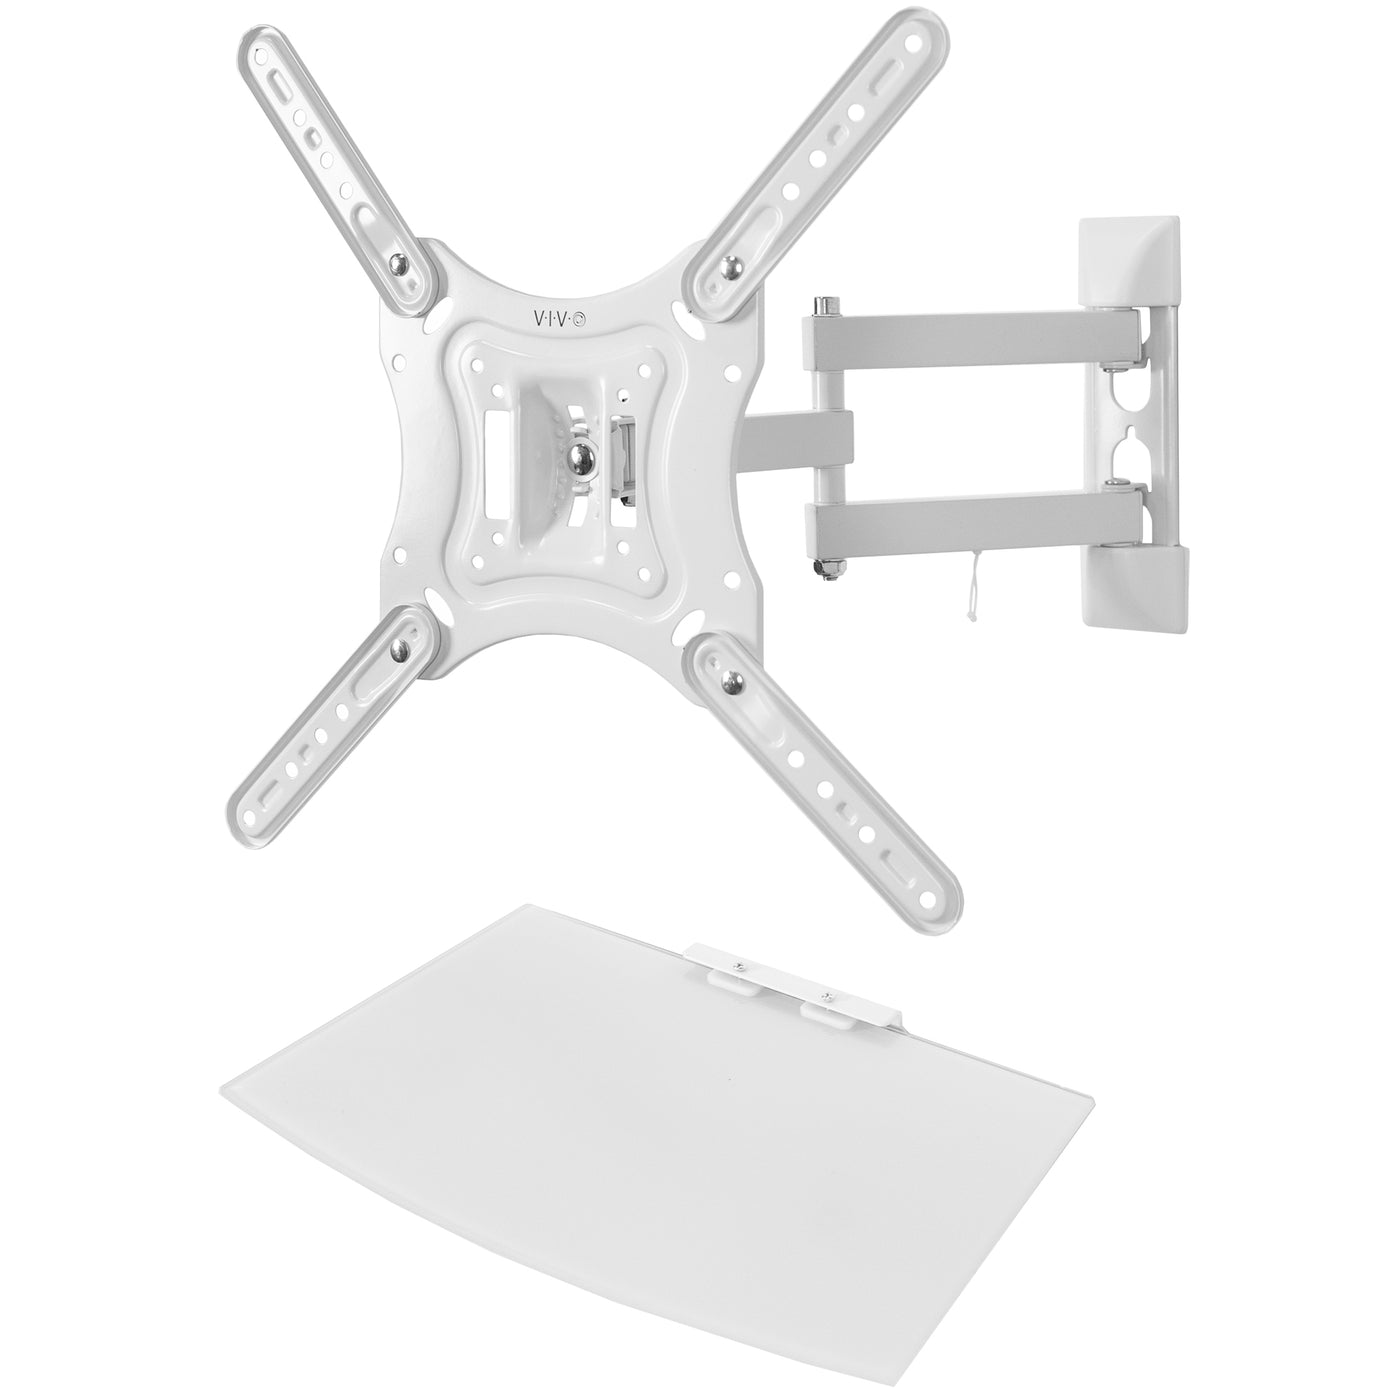 White sturdy TV wall mount with tempered glass shelf set from VIVO.